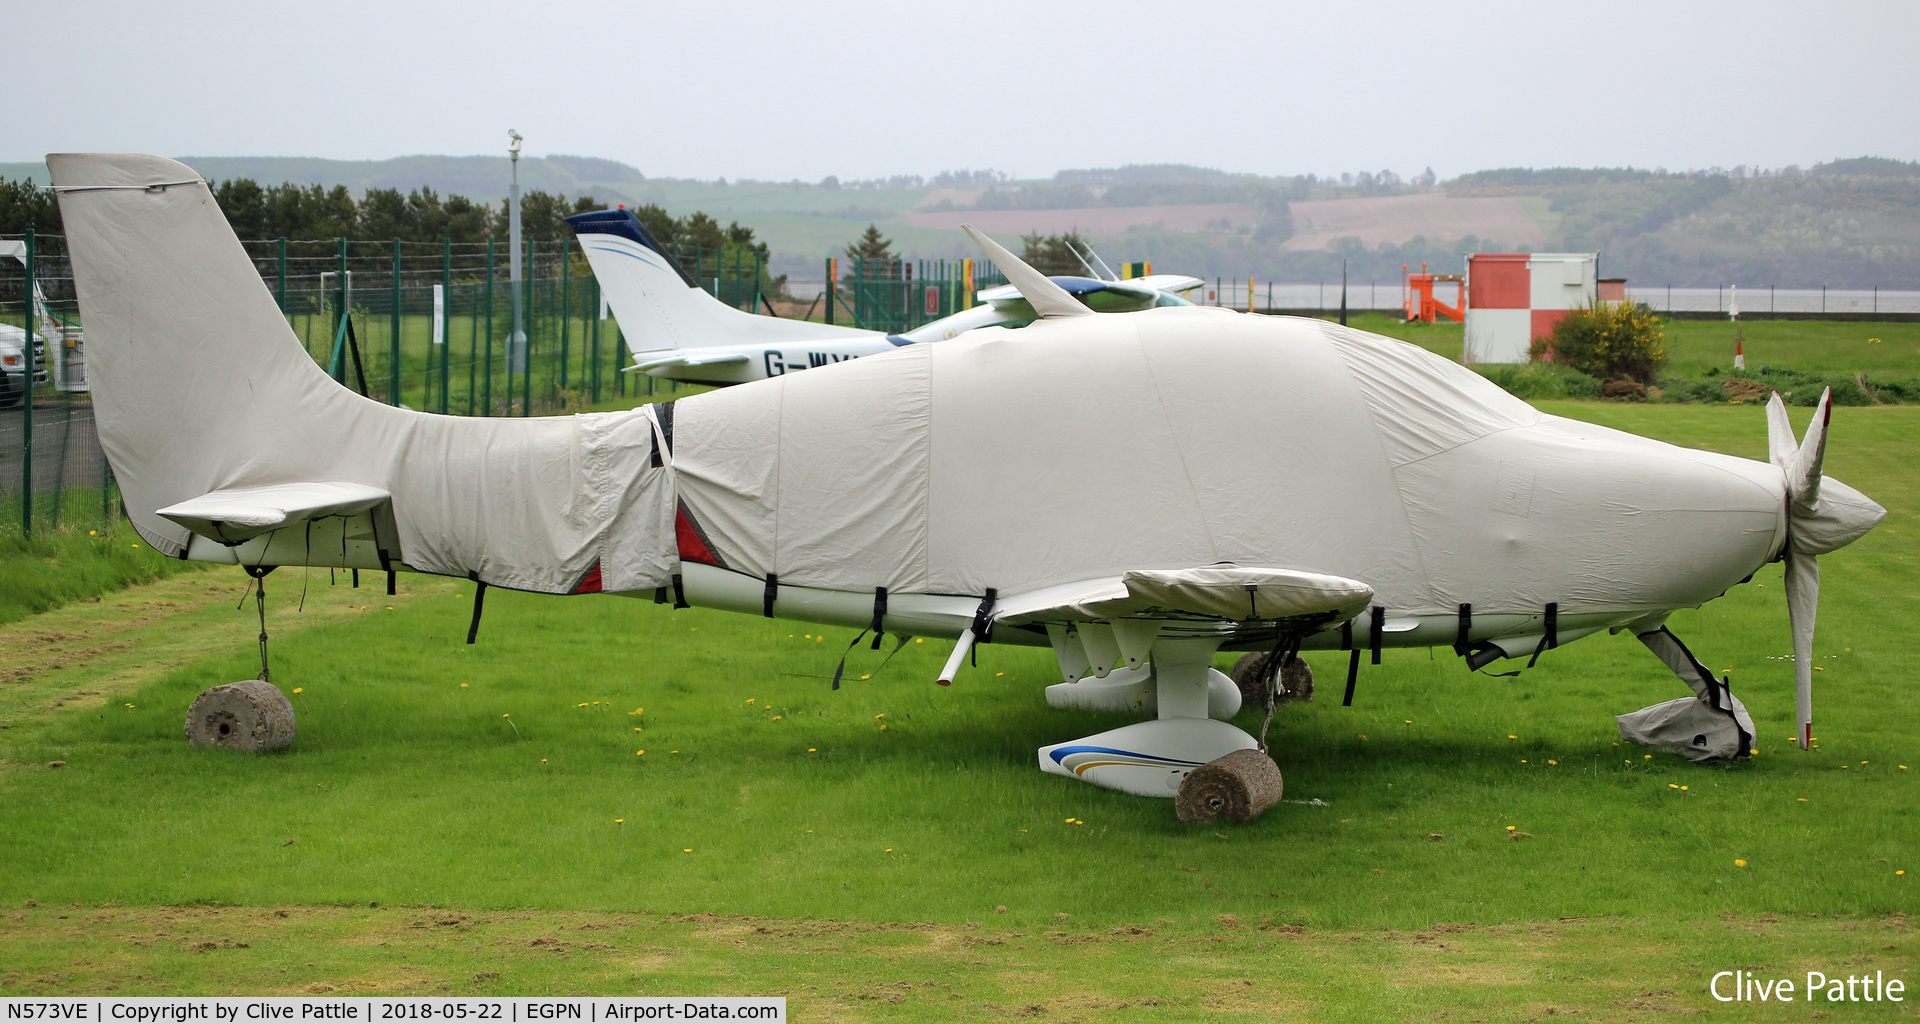 N573VE, 2004 Cirrus SR22 G2 C/N 1078, Parked up under cover at Dundee